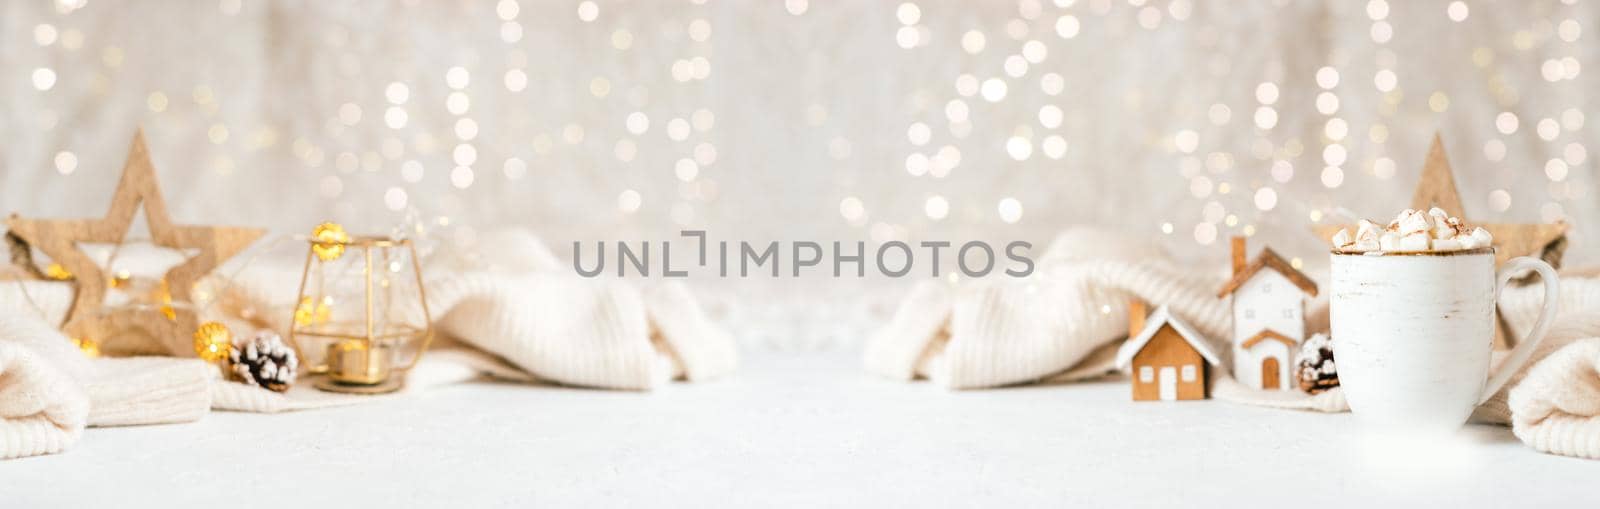 Details of Still life, cup of coffee with marshmallows, wooden decor, candle, Christmas lights with sweater on white background, home decor in cozy house. Banner for Winter weekend concept.